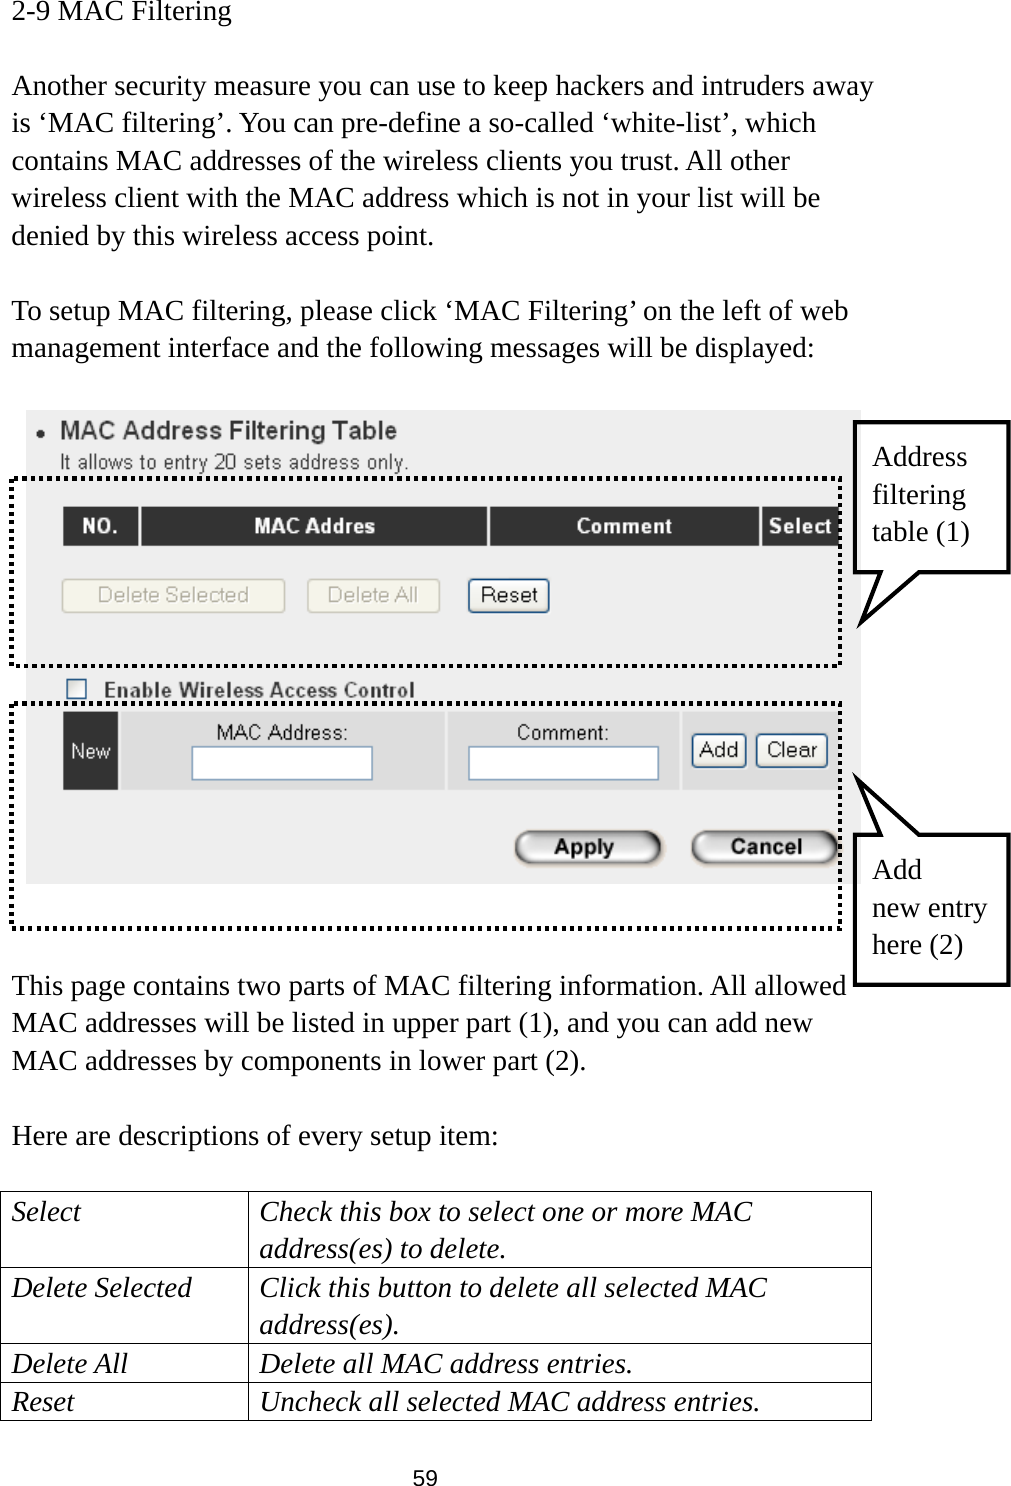  59 2-9 MAC Filtering  Another security measure you can use to keep hackers and intruders away is ‘MAC filtering’. You can pre-define a so-called ‘white-list’, which contains MAC addresses of the wireless clients you trust. All other wireless client with the MAC address which is not in your list will be denied by this wireless access point.  To setup MAC filtering, please click ‘MAC Filtering’ on the left of web management interface and the following messages will be displayed:      This page contains two parts of MAC filtering information. All allowed MAC addresses will be listed in upper part (1), and you can add new MAC addresses by components in lower part (2).  Here are descriptions of every setup item:  Select Check this box to select one or more MAC address(es) to delete. Delete Selected Click this button to delete all selected MAC address(es). Delete All Delete all MAC address entries. Reset Uncheck all selected MAC address entries. Address filtering  table (1) Add  new entryhere (2) 